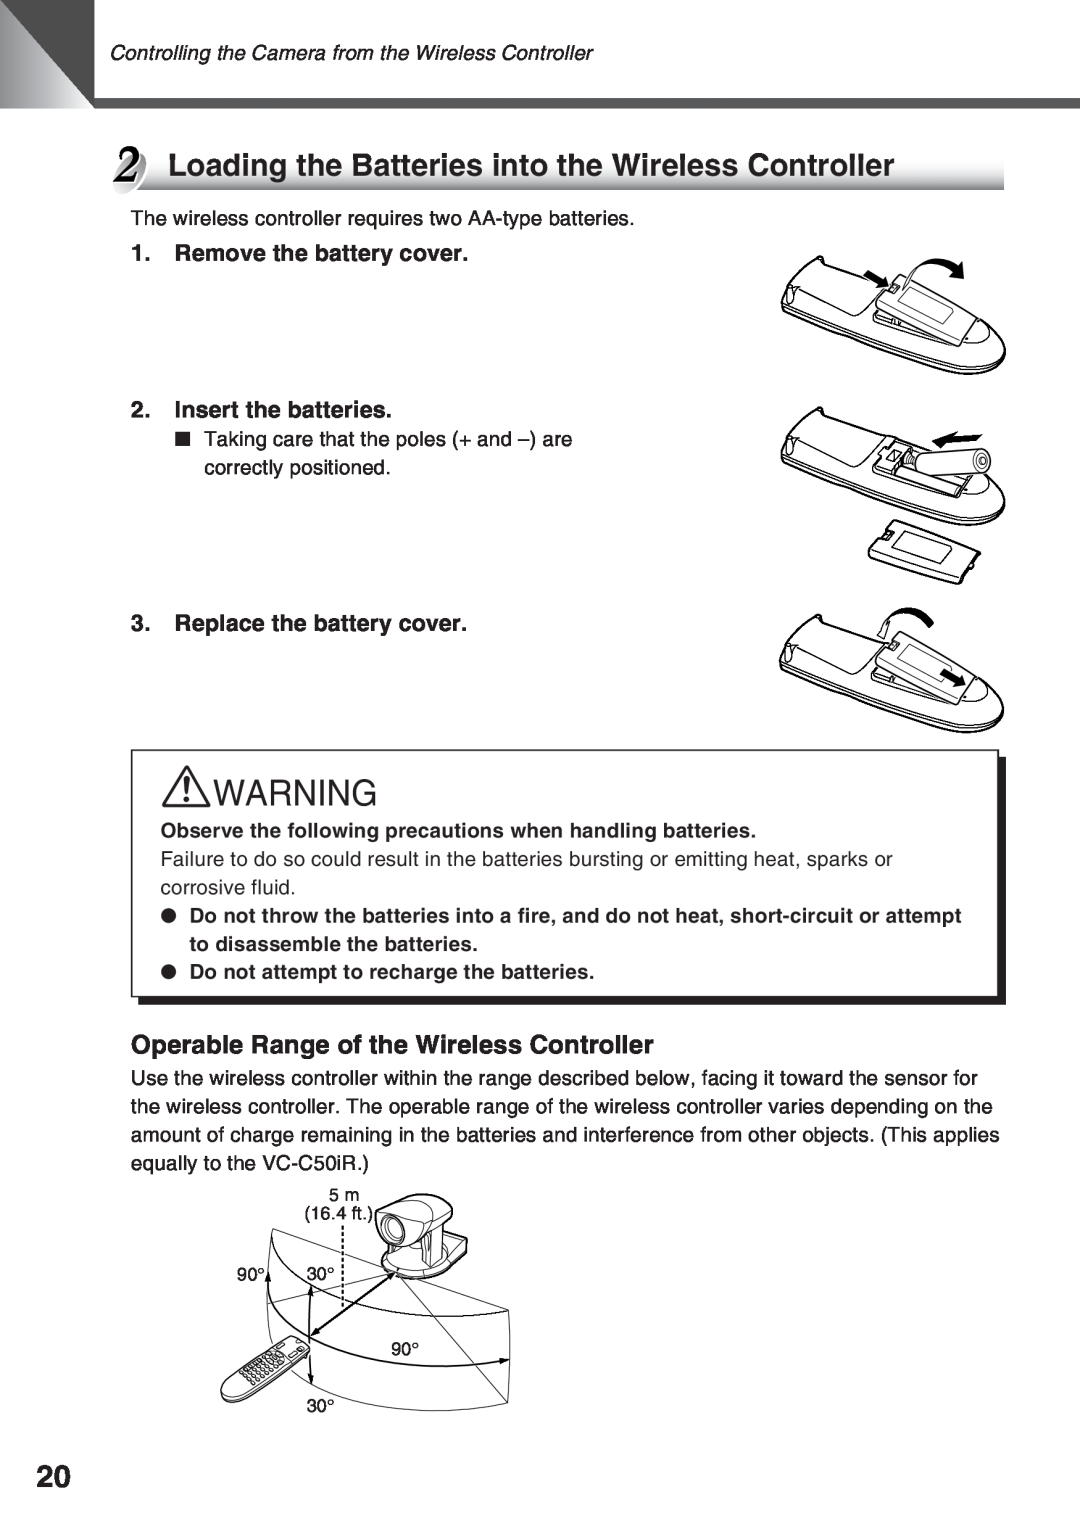 Canon VC-C50IR, VC-C50i instruction manual Operable Range of the Wireless Controller, aWARNING 